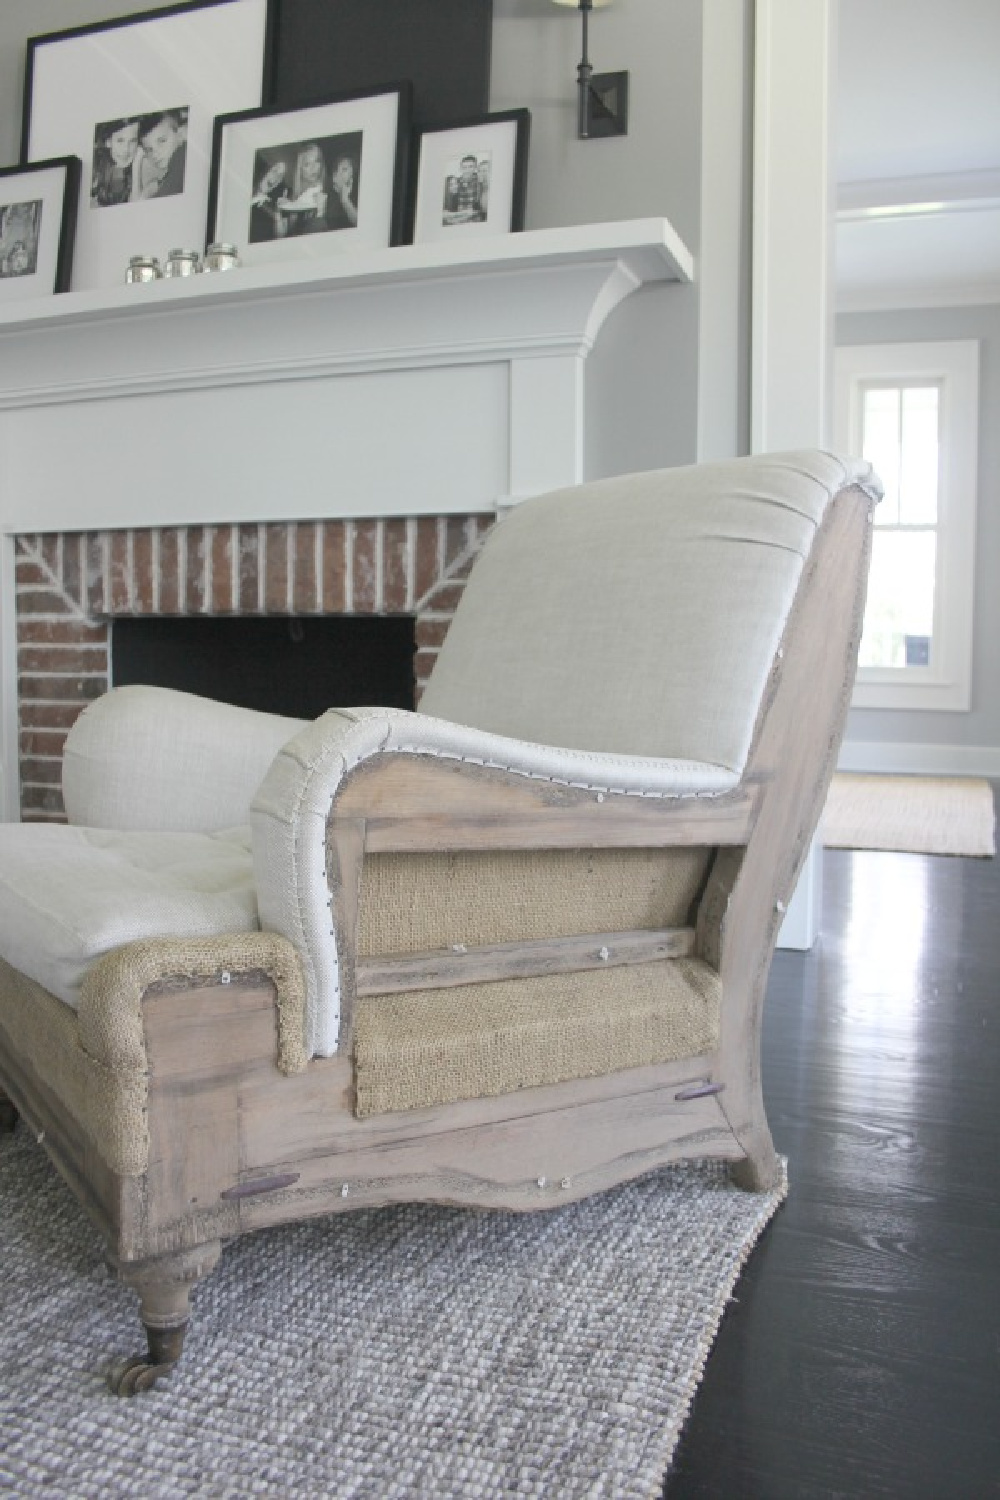 Deconstructed chair in modern farmhouse living room with fireplace. Come see the house tour! #modernfarmhouse #benjaminmoorestoningtongray